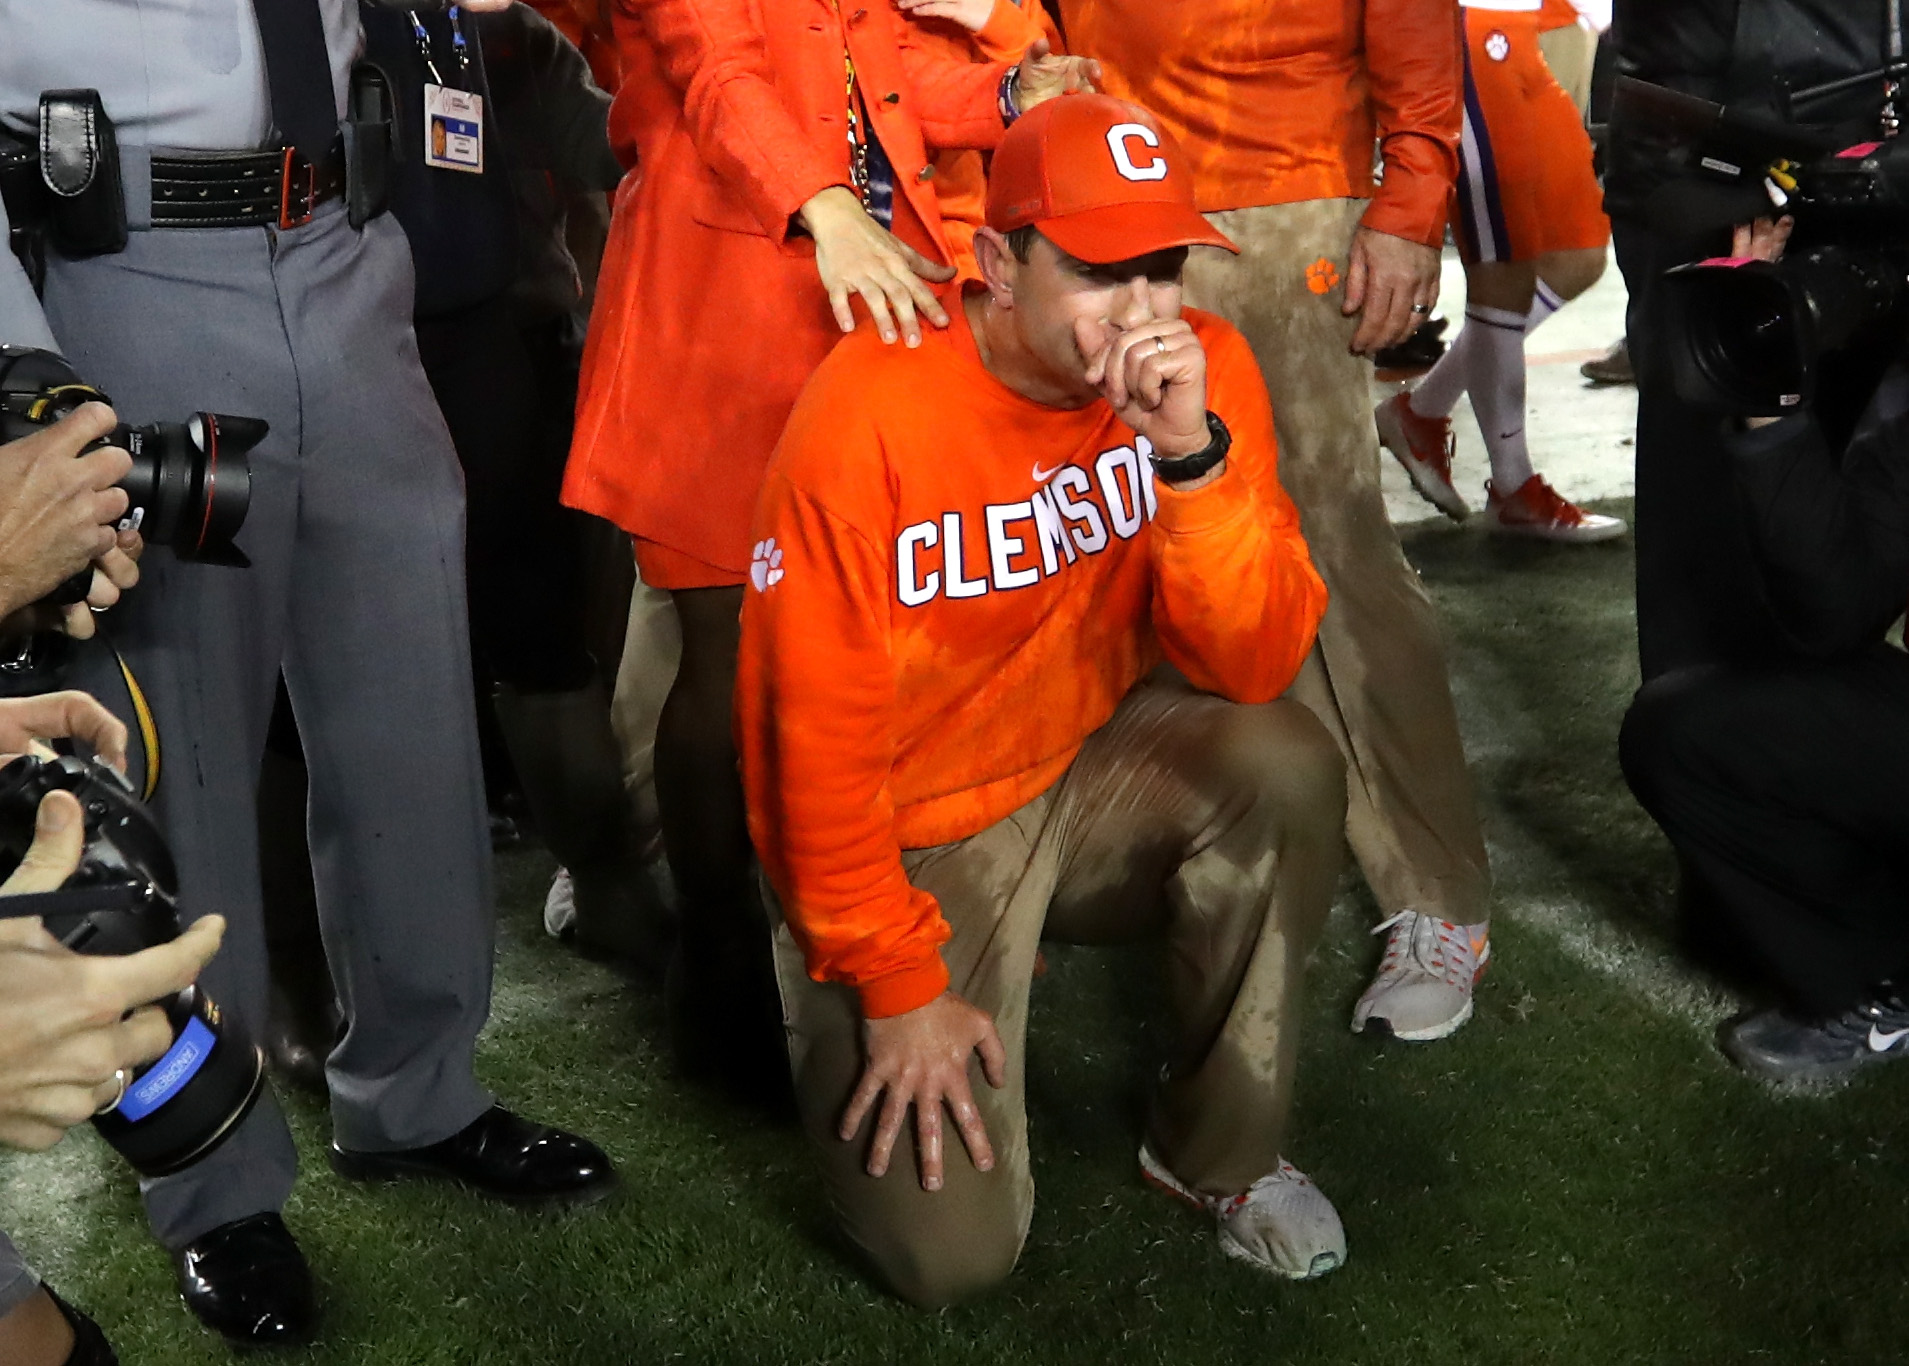 Head coach Dabo Swinney of the Clemson Tigers reacts after his team defeated the Alabama Crimson Tide 35-31 to win the 2017 College Football Playoff National Championship Game in Tampa, Florida, on Jan. 9, 2017. (Streeter Lecka—Getty Images)